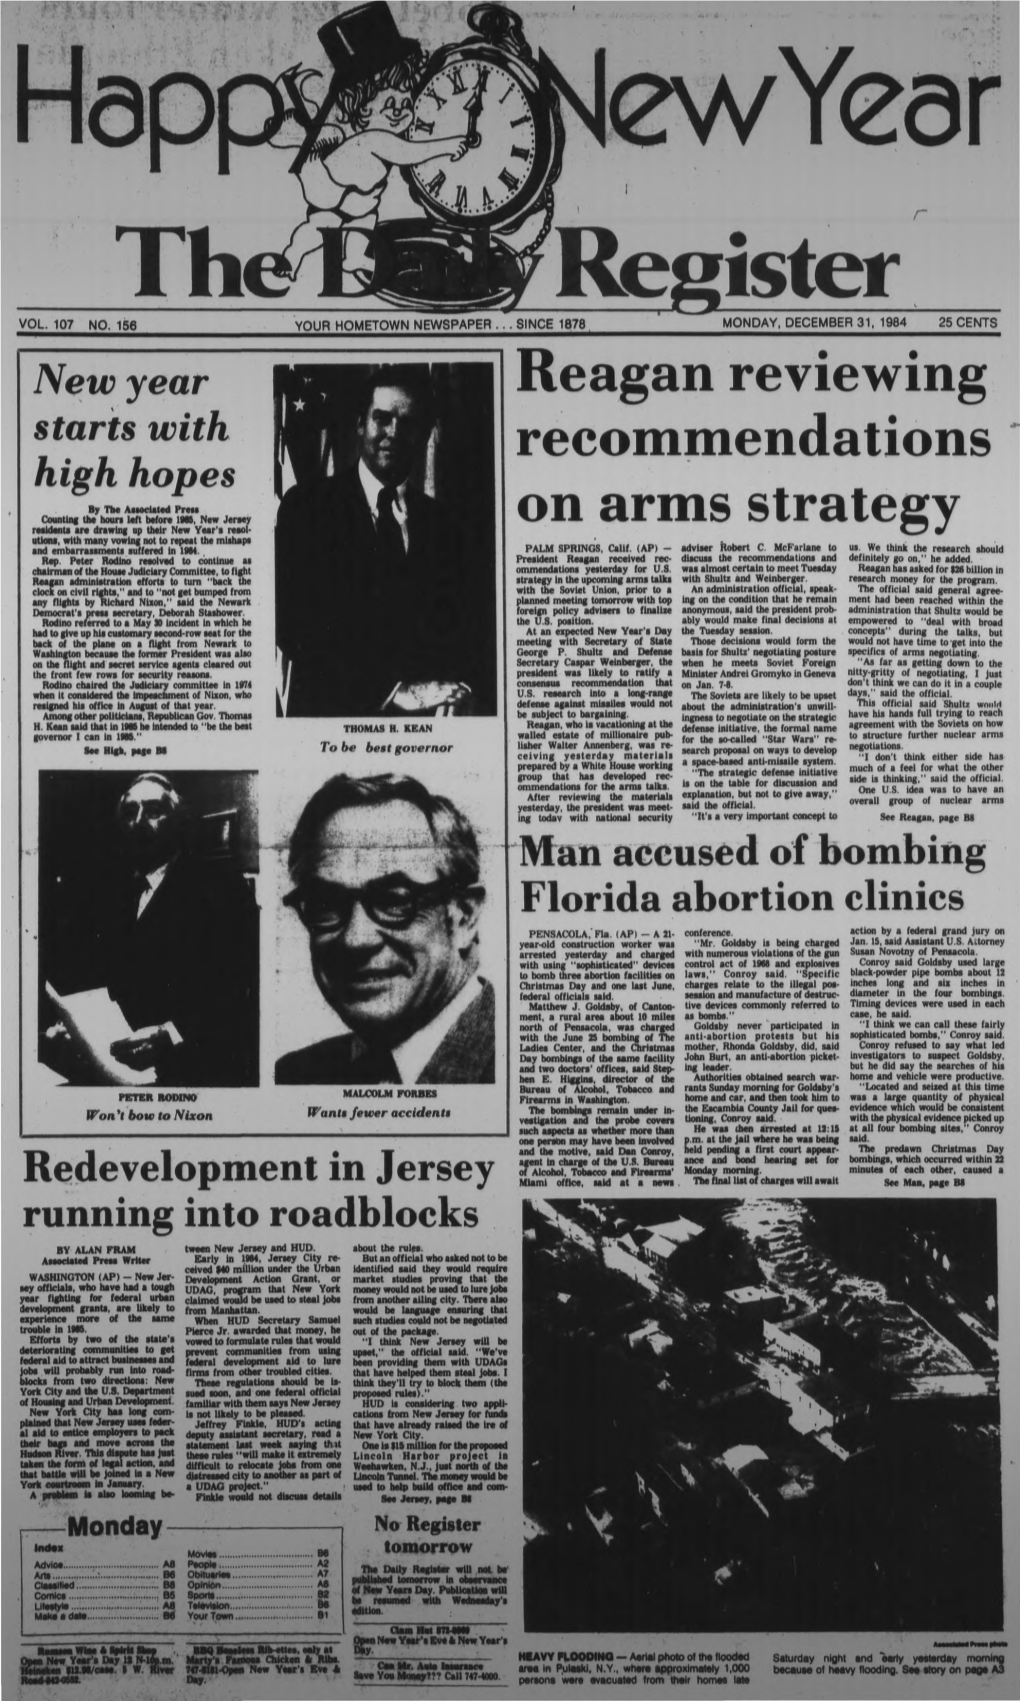 Reagan Reviewing Recommendations on Arms Strategy